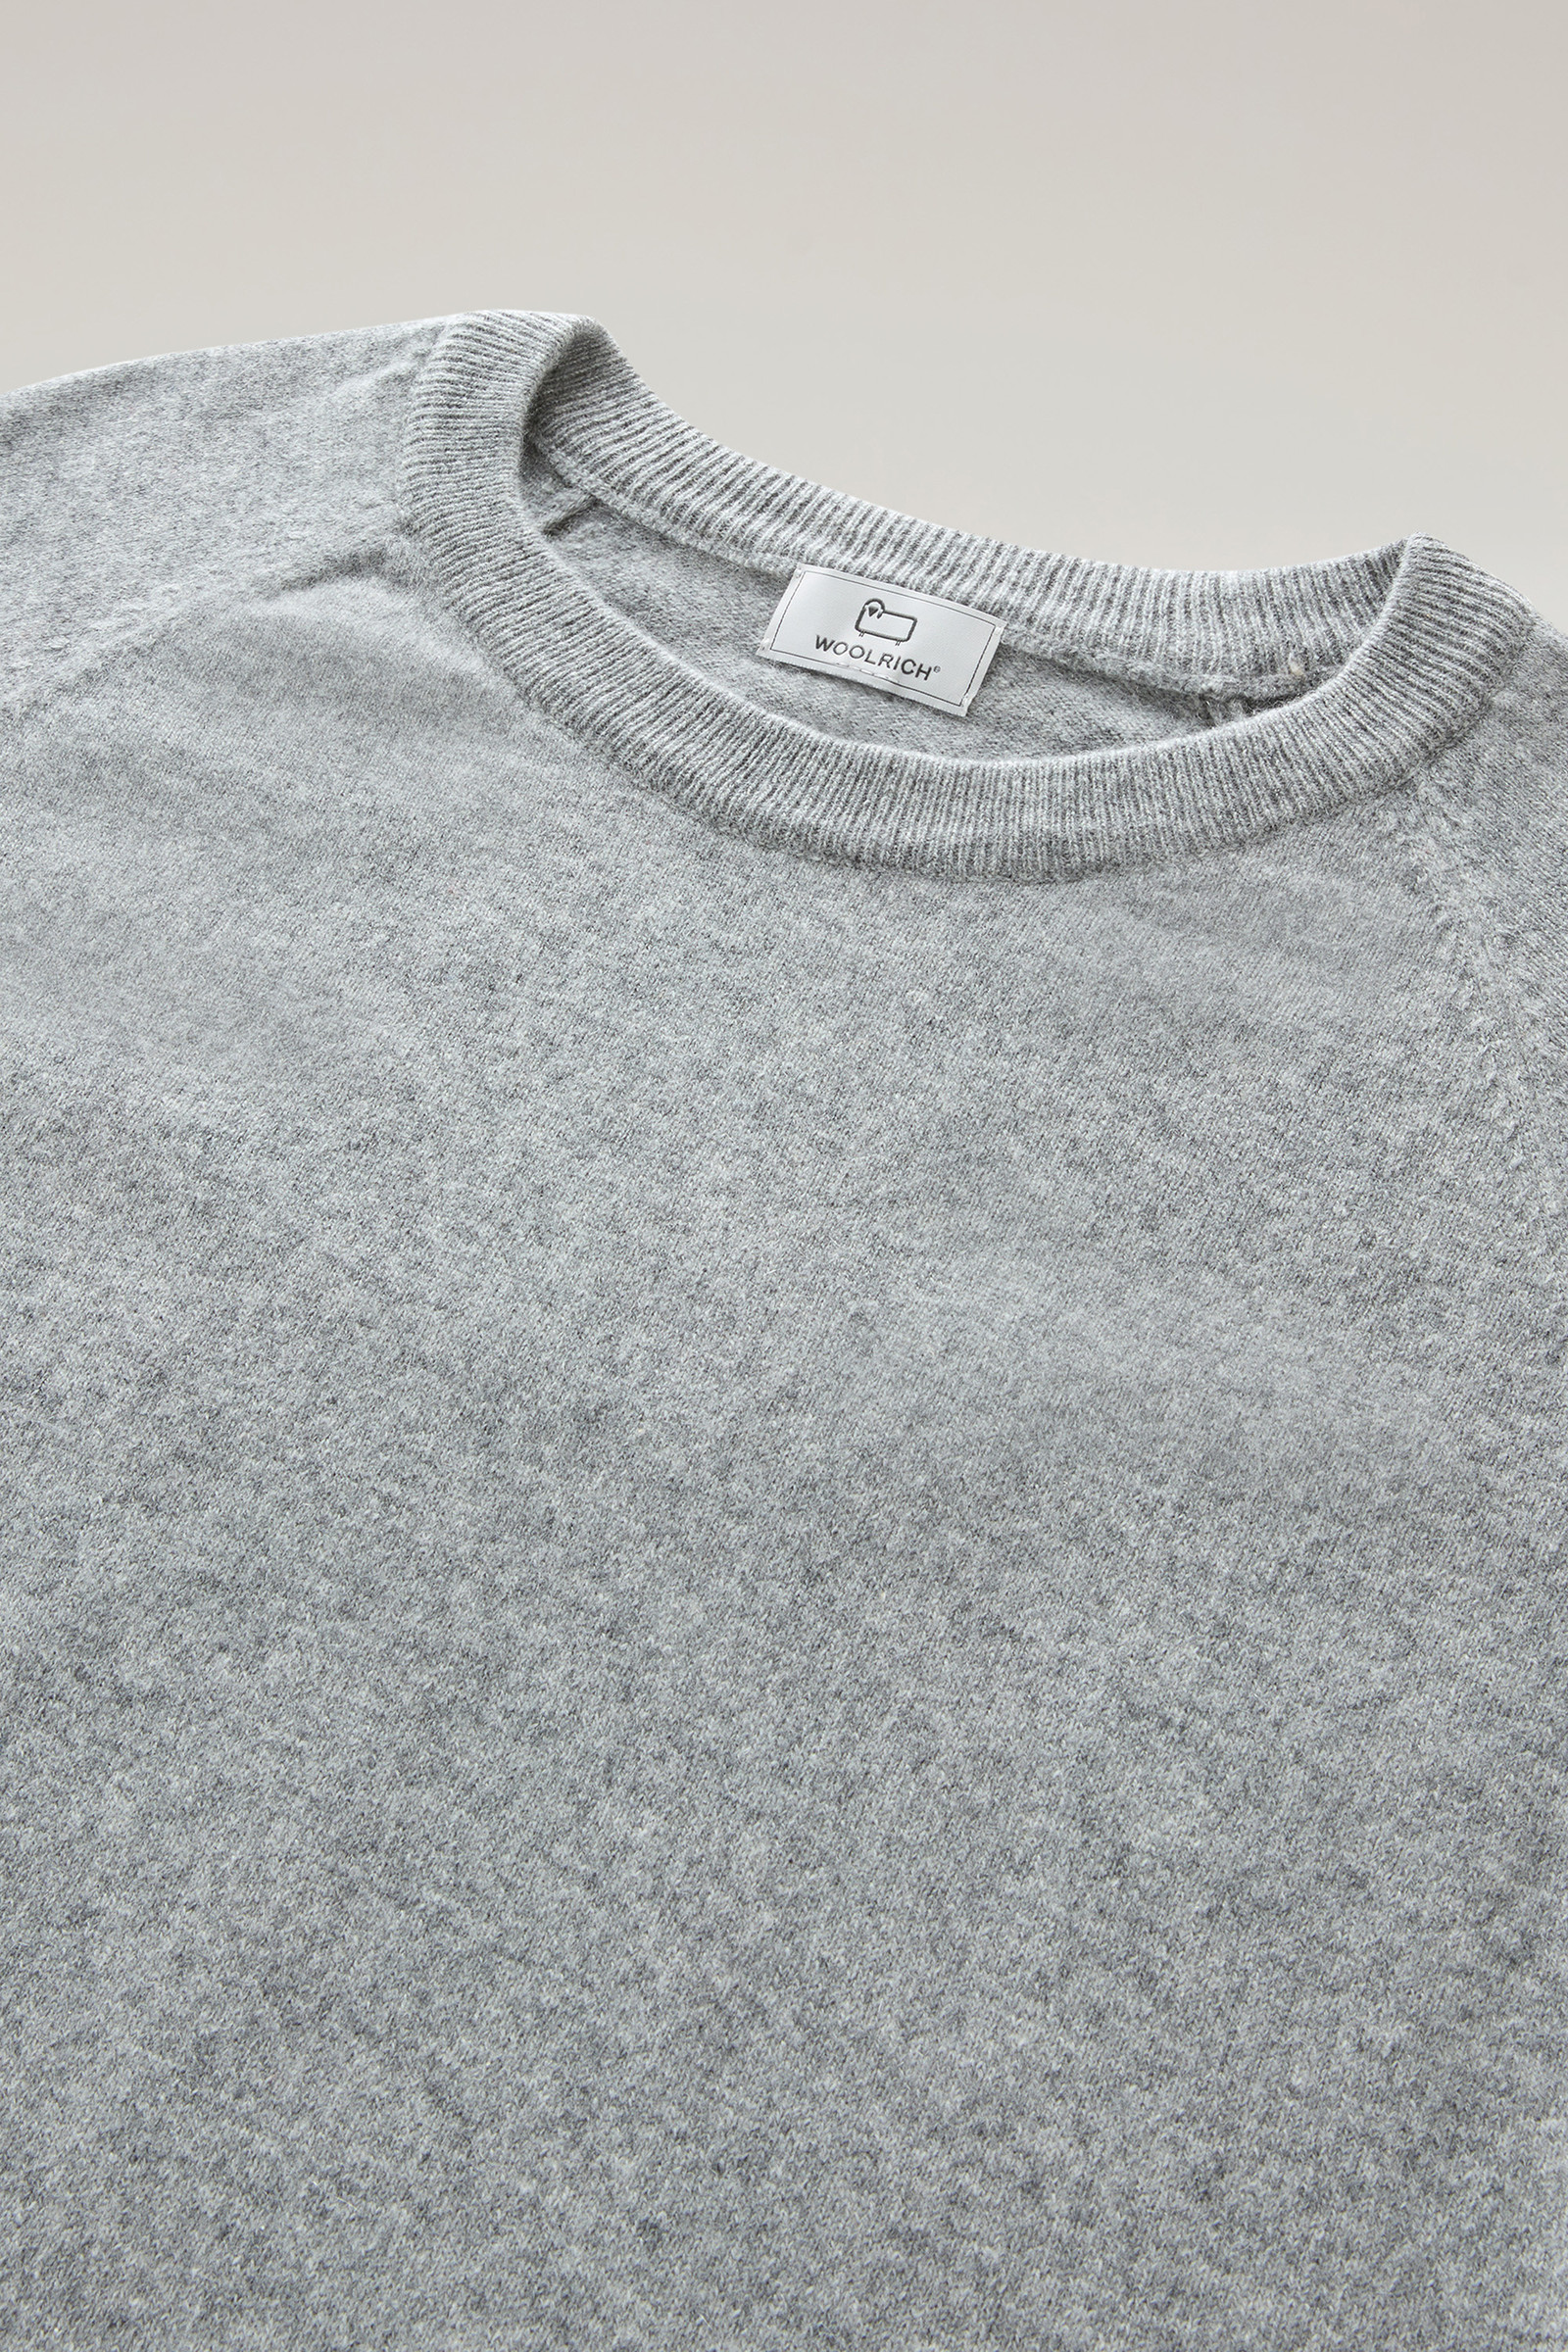 Men's Luxe Crewneck Sweater in Pure Cashmere Grey | Woolrich USA